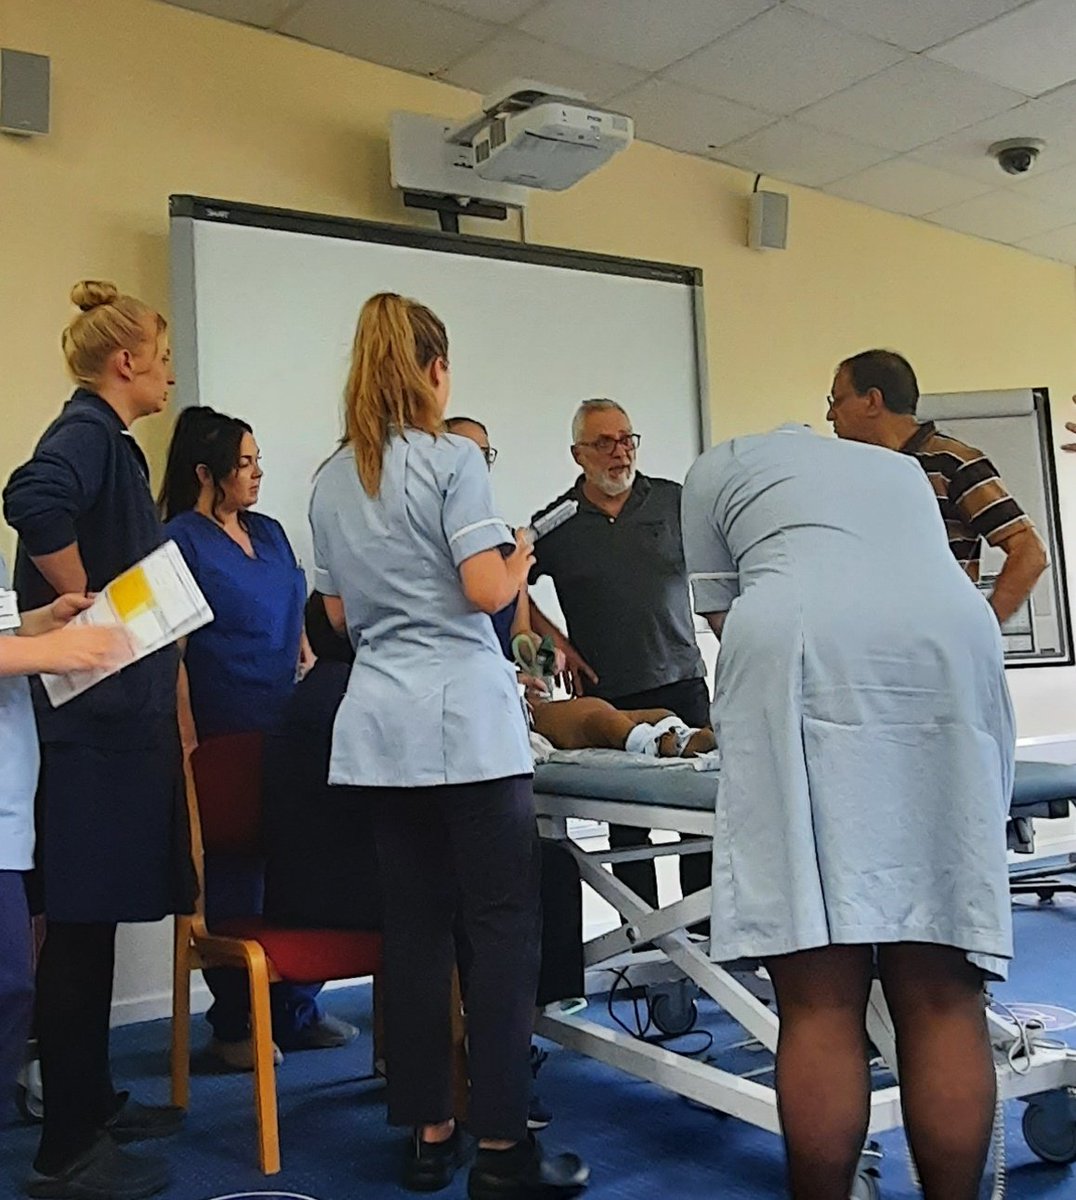 #CRH annual PRES Simulation day. A relaxed atmosphere created to tackle complex paediatric cases. Amazing work once again and many thanks to @HelenMo90678670 for leading. #gettingbetteratgettingbetter